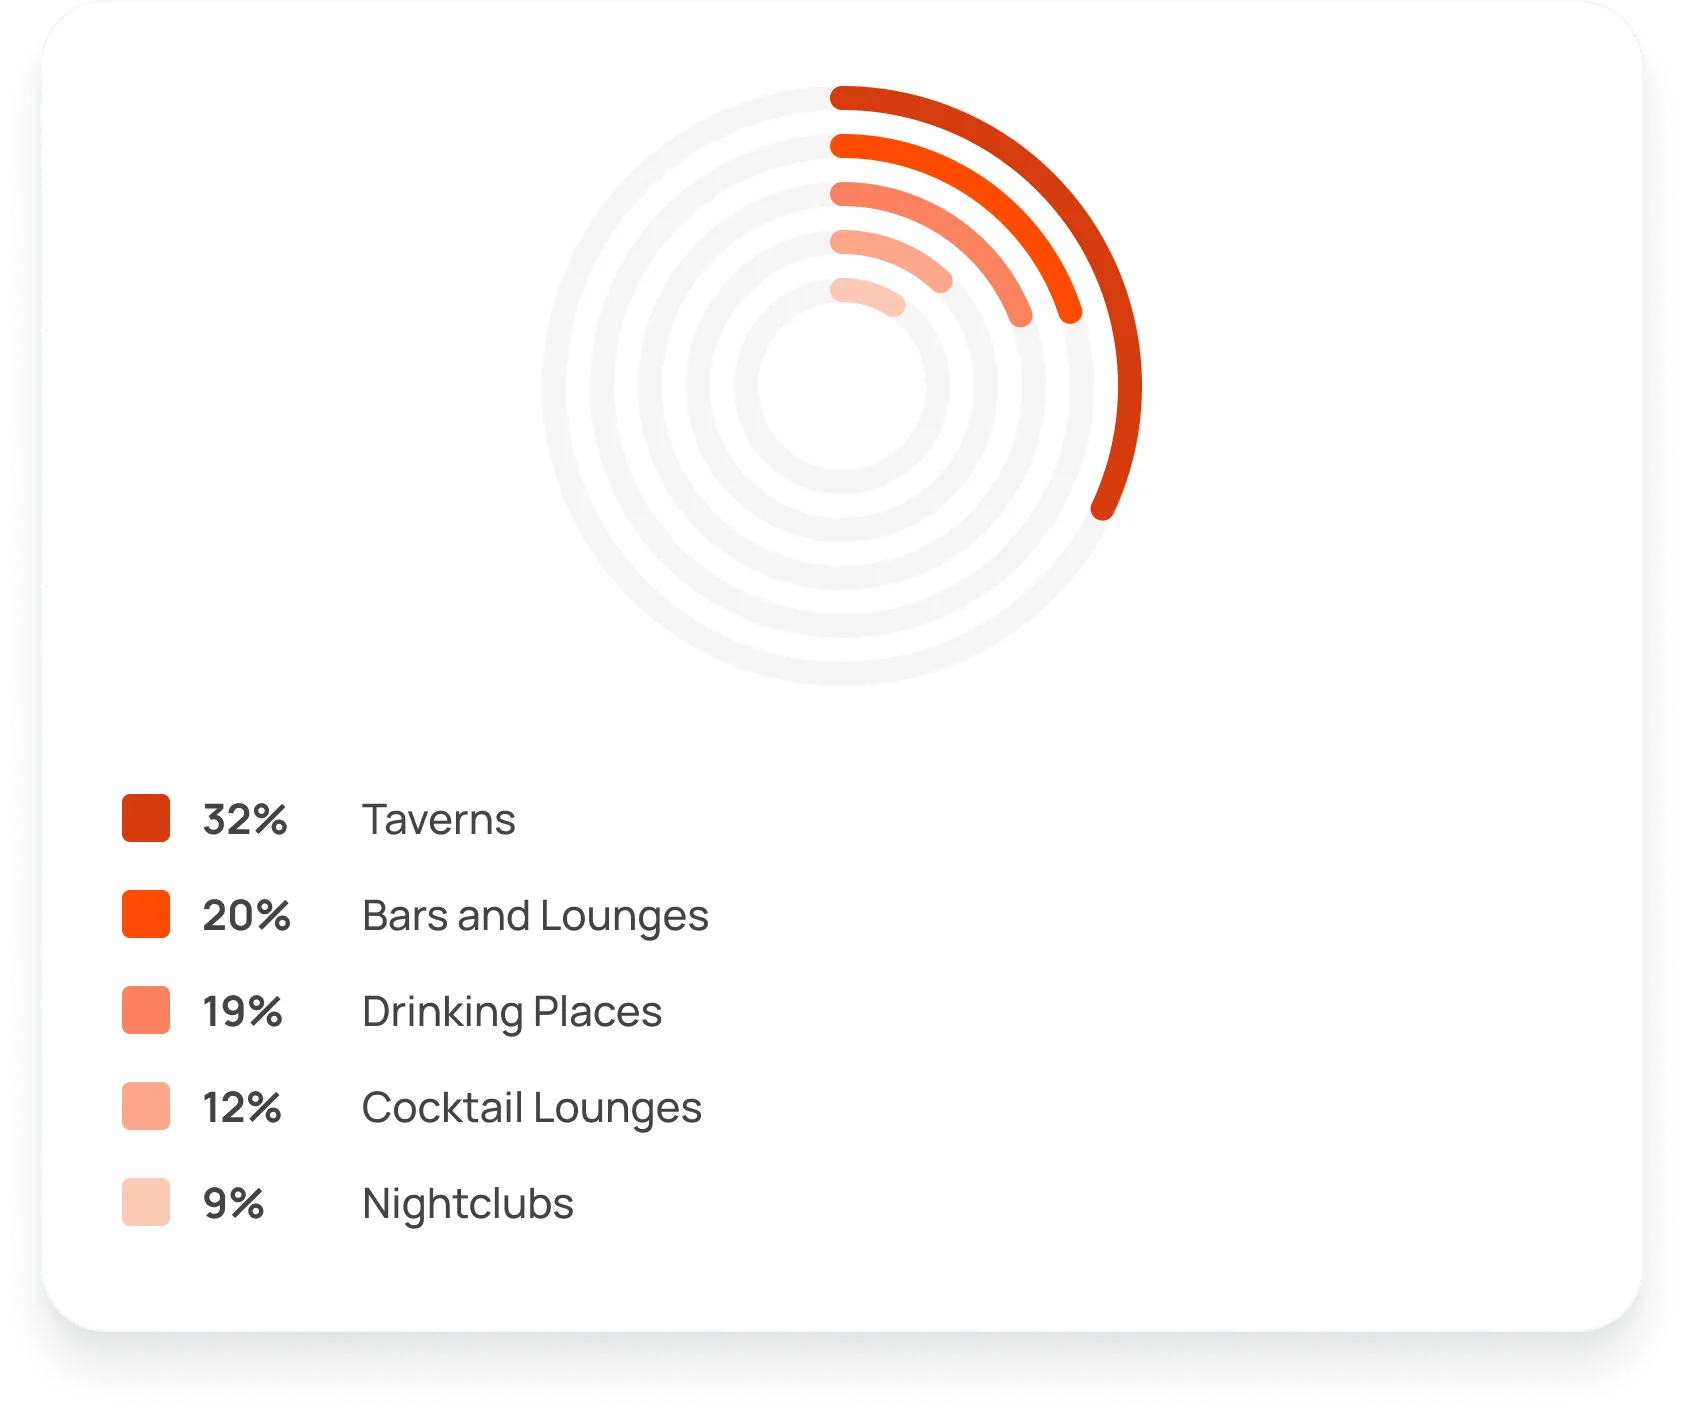 Types of Bars or Clubs by percentage:   32% - Taverns, 20% - Bars and Lounges, 19% - Drinking Places, 12% - Cocktail Lounges, 9% - Nightclubs 